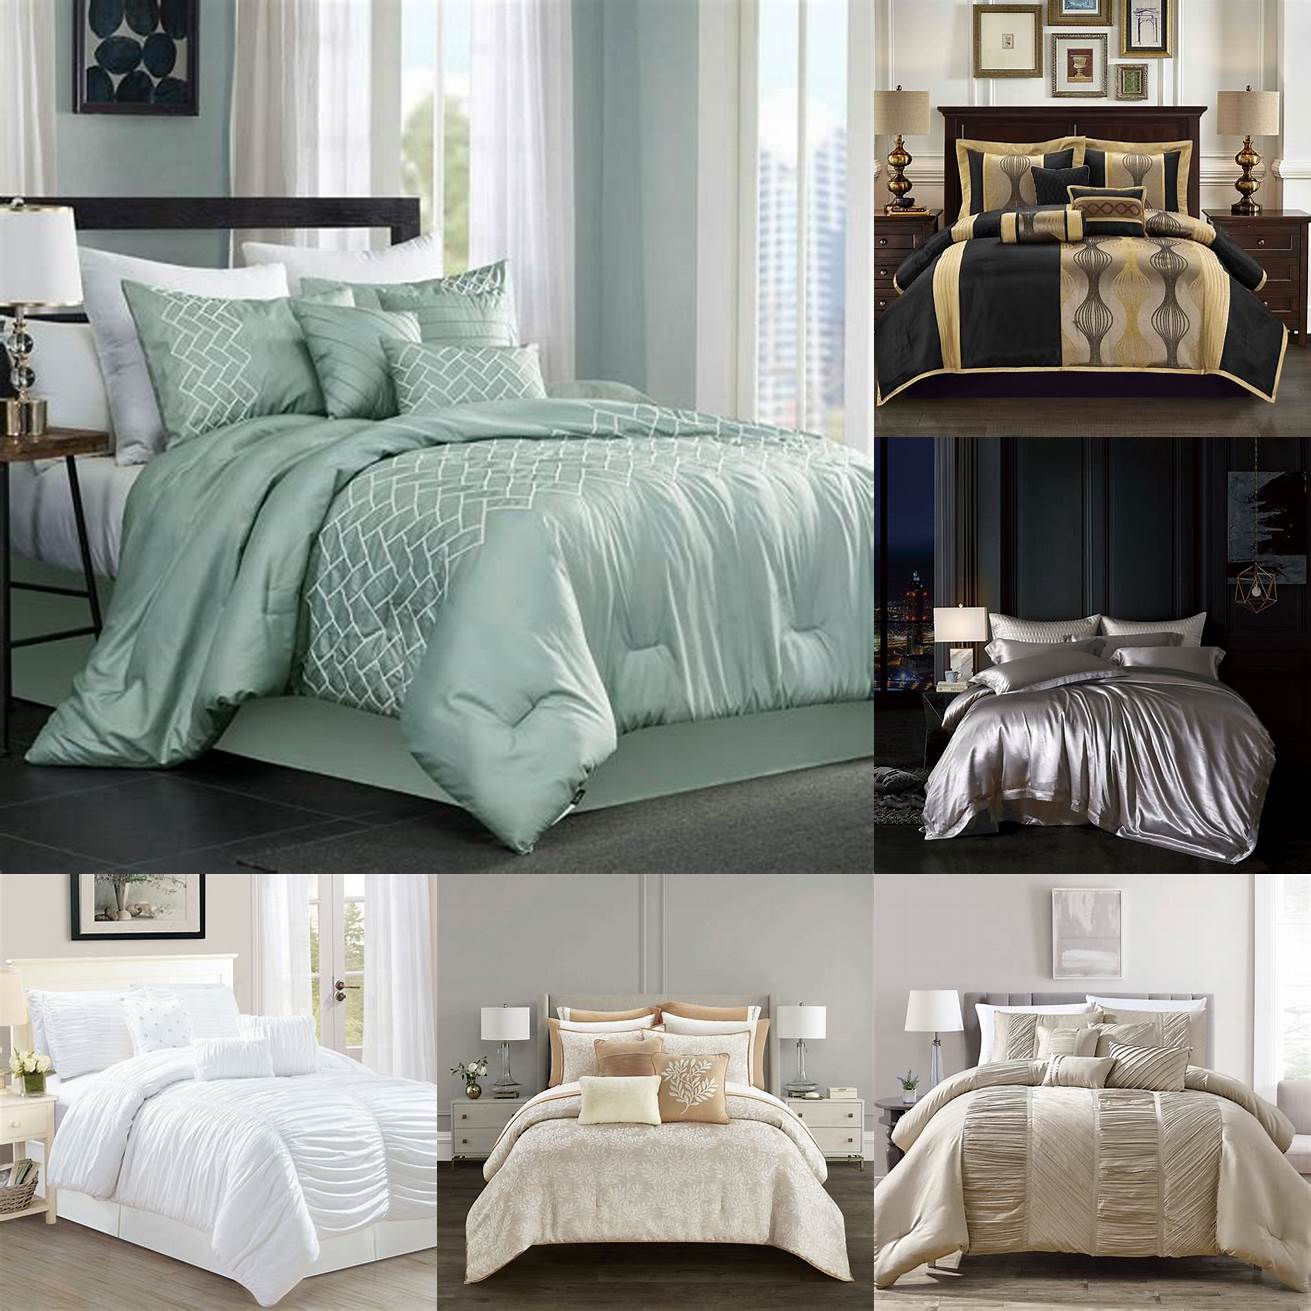 Consider Price Quality bedding can be expensive but its worth the investment